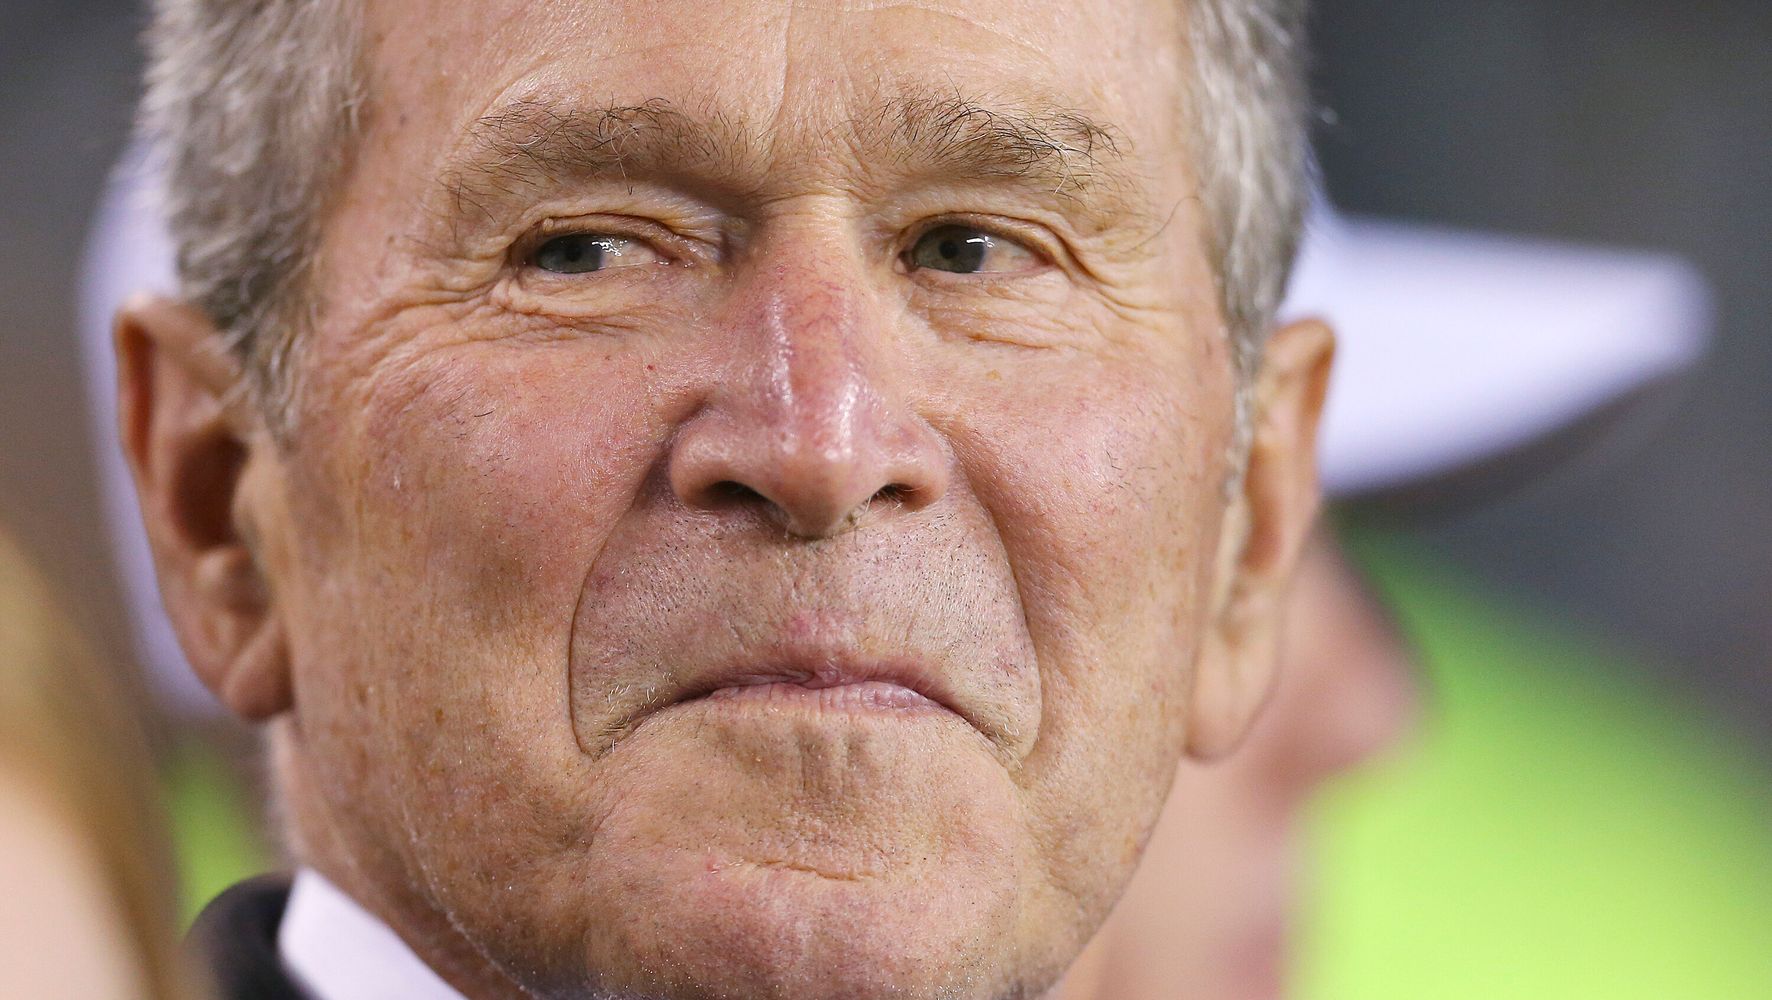 Twitter Users Aghast By George Bush's 